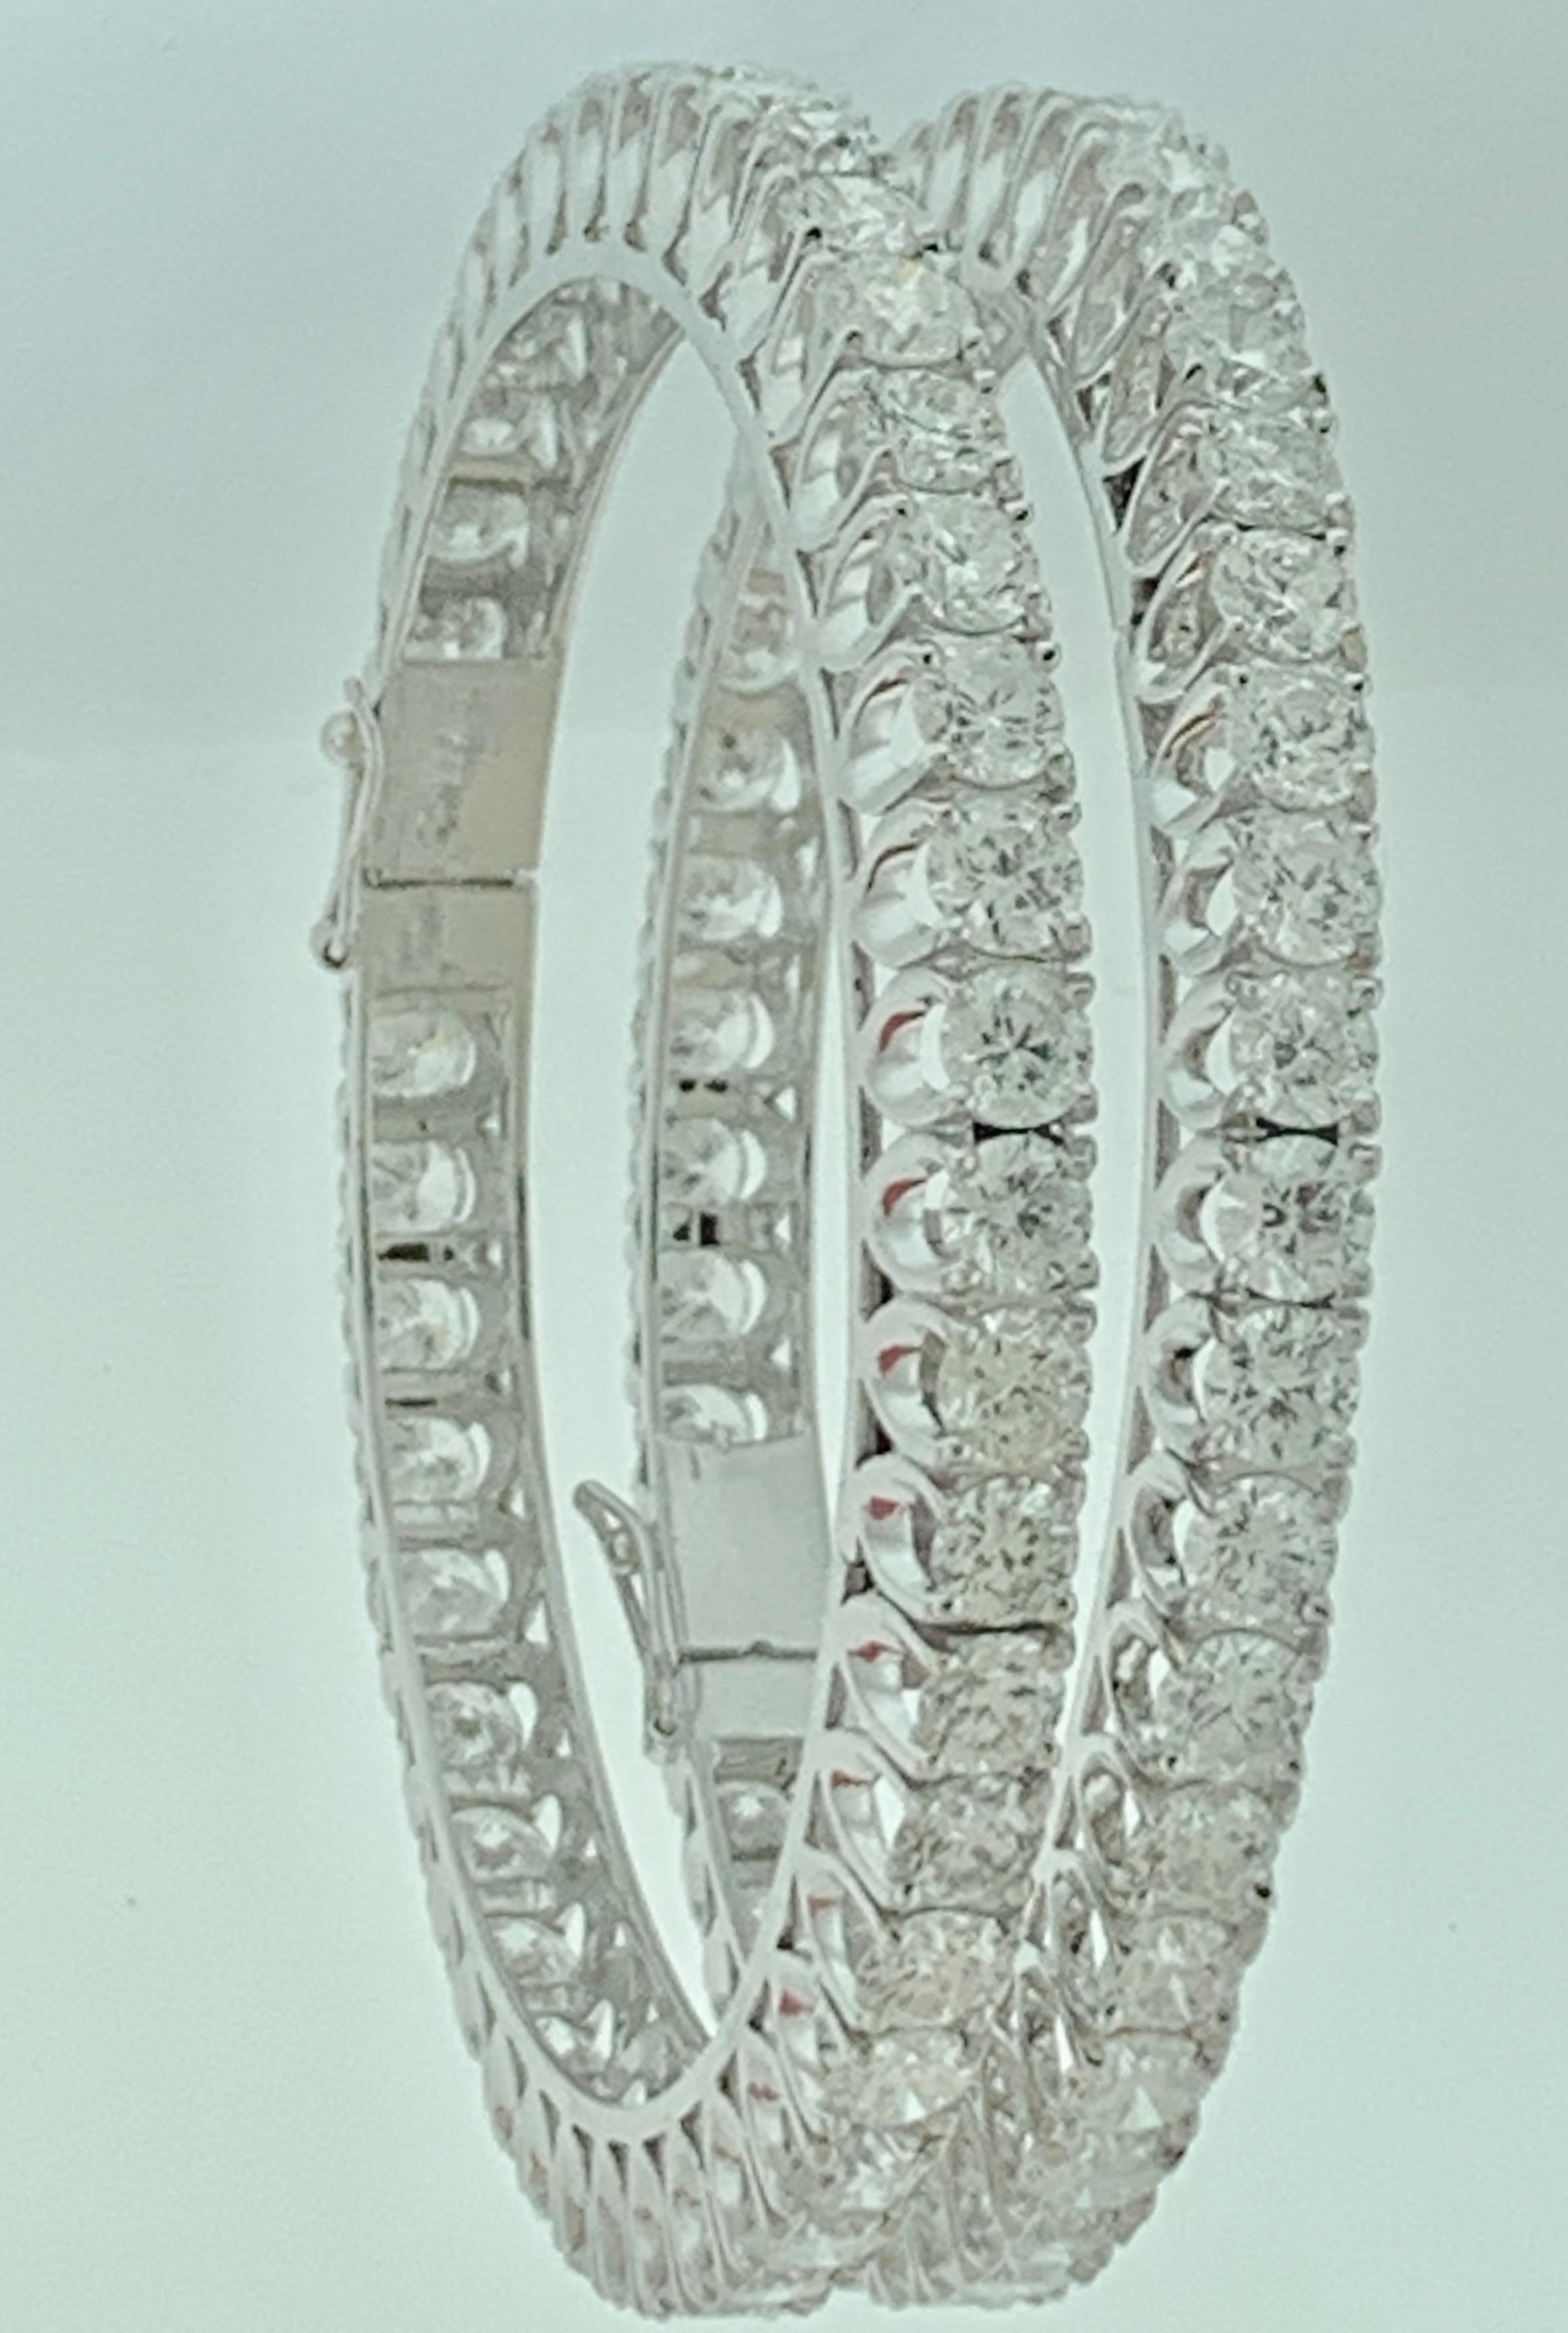 40 Pointer Each, 36 Ct Single line Eternity 18 Kt Gold and Diamond Bangle, Pair 1